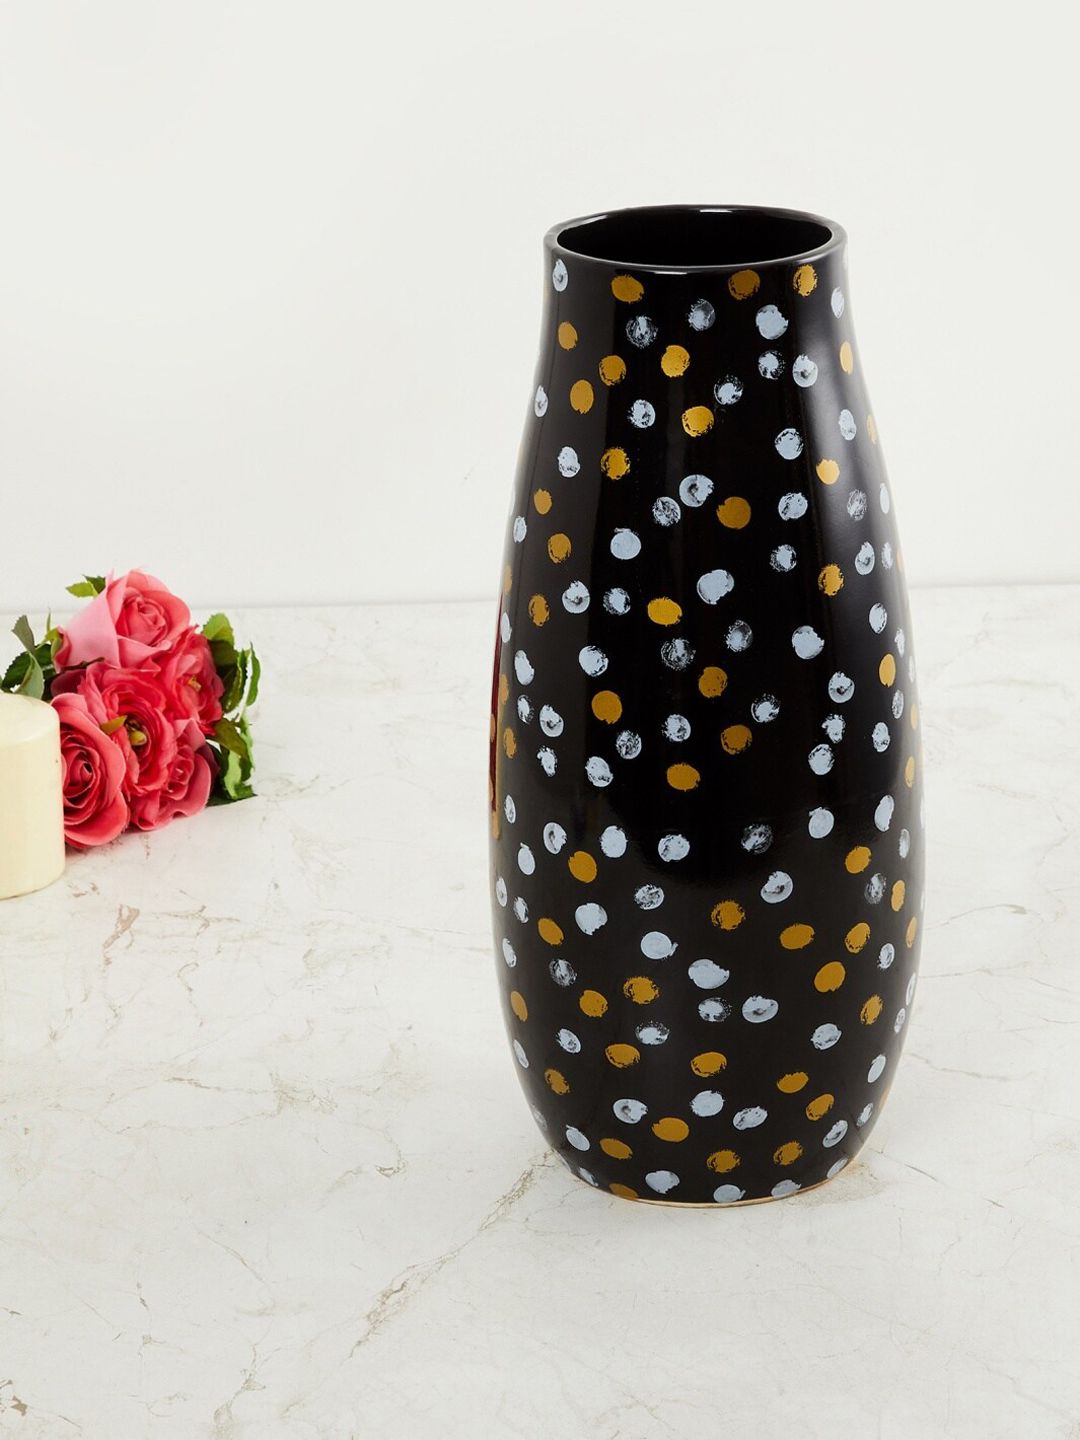 Home Centre Black & Mustard Yellow Polka-Dot Print Eternity Decal Vase Price in India